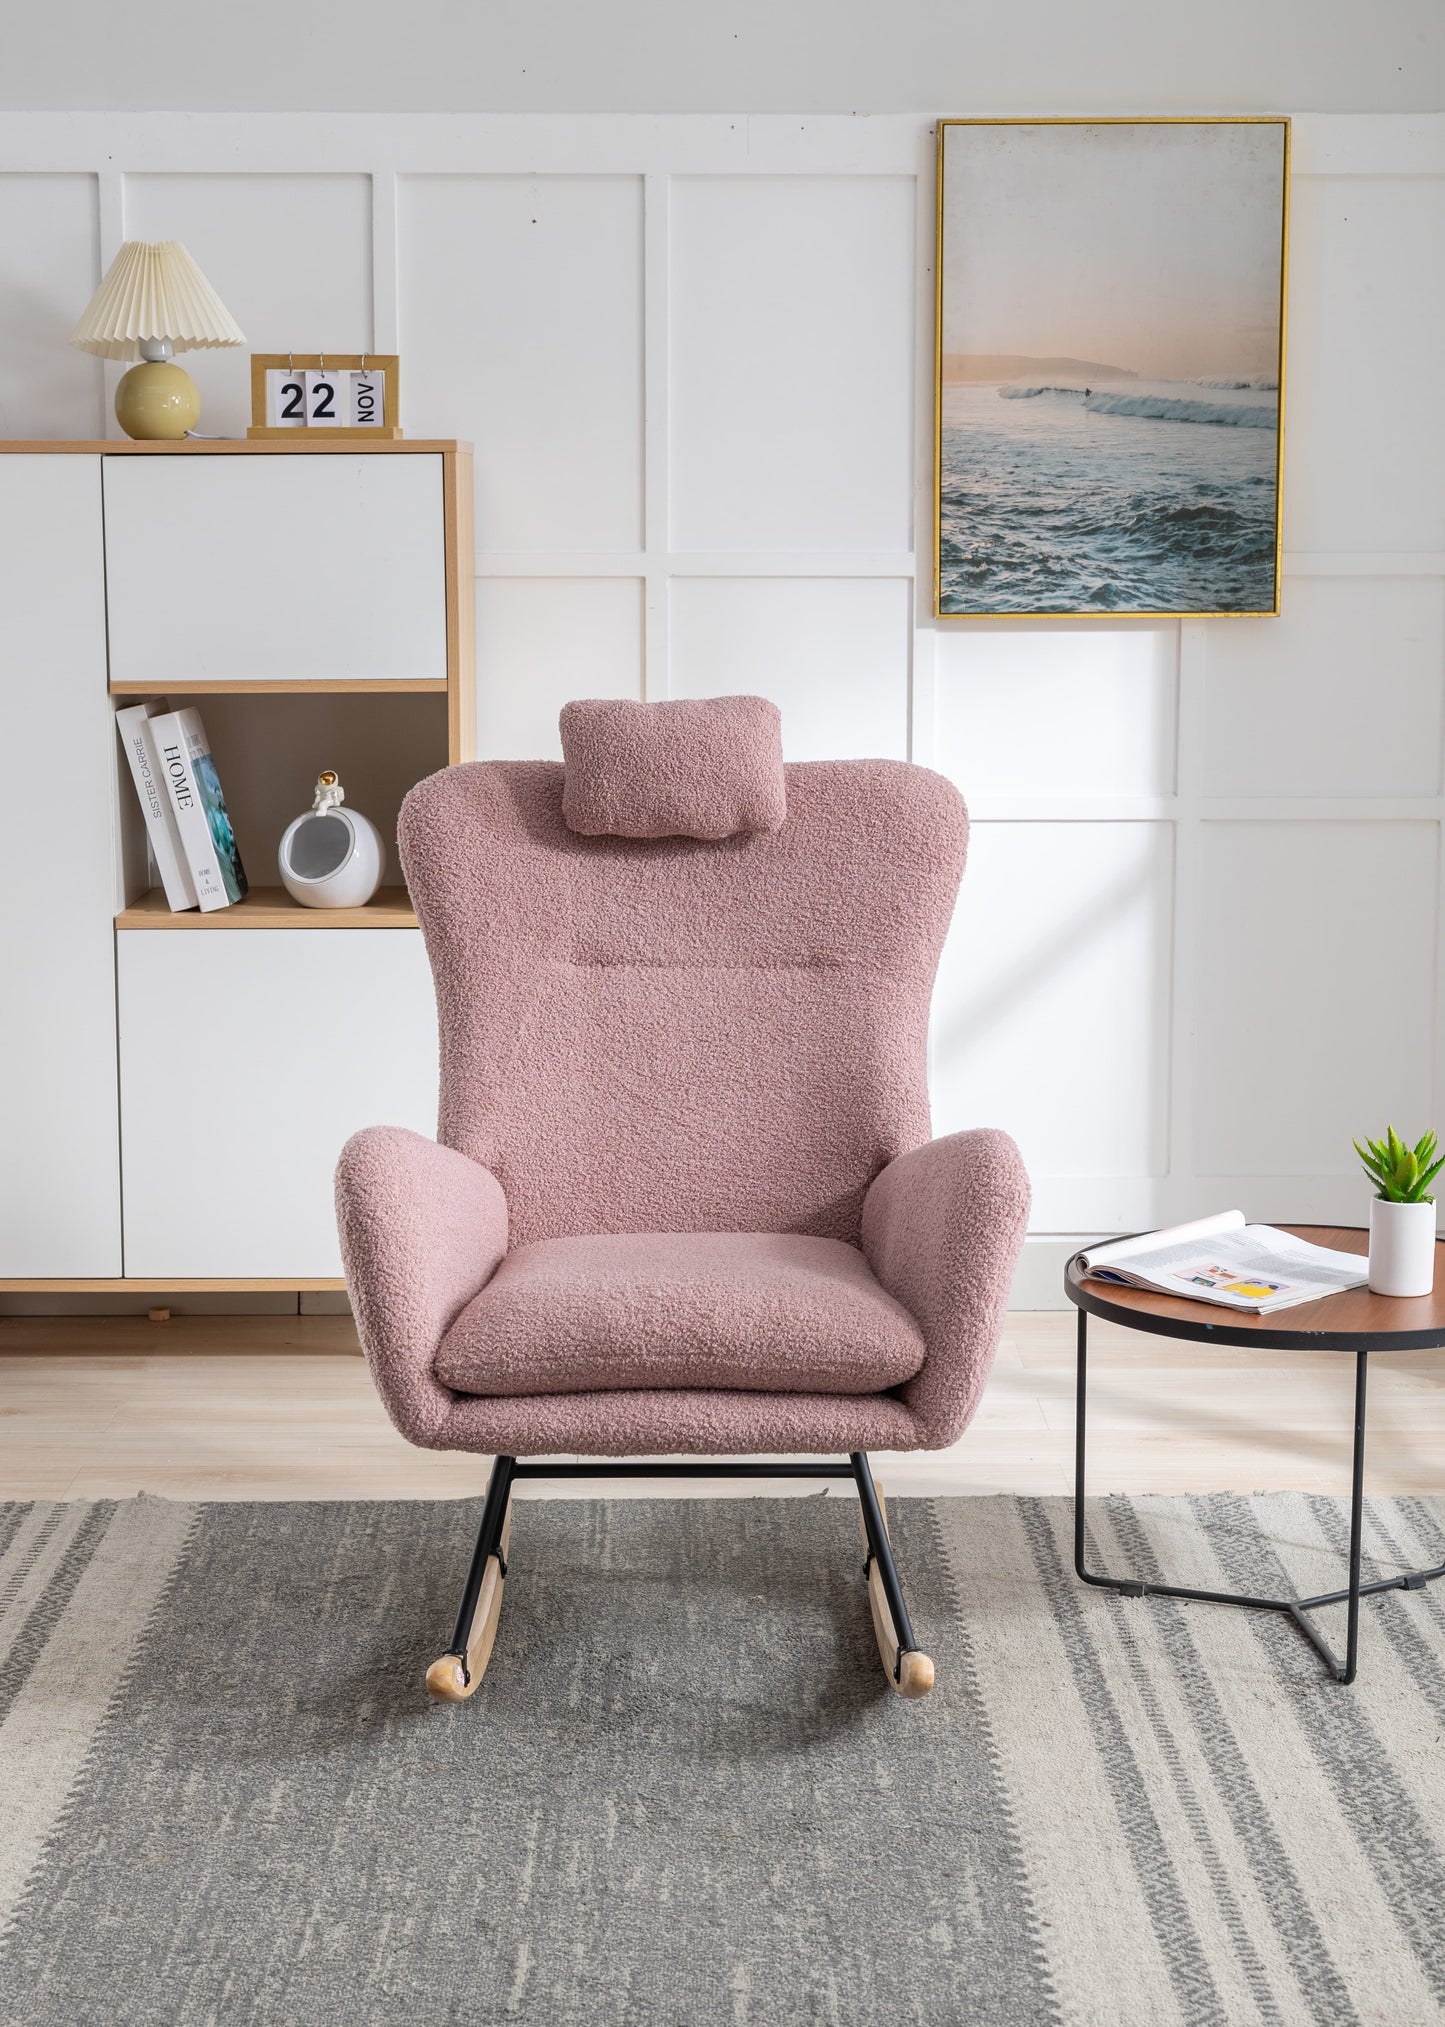 SogesPower 35.5in Rocking Chair, Soft Teddy Velvet Fabric Rocking Chair for Nursery, Comfy Wingback Glider Rocker with Safe Solid Wood Base- Pink